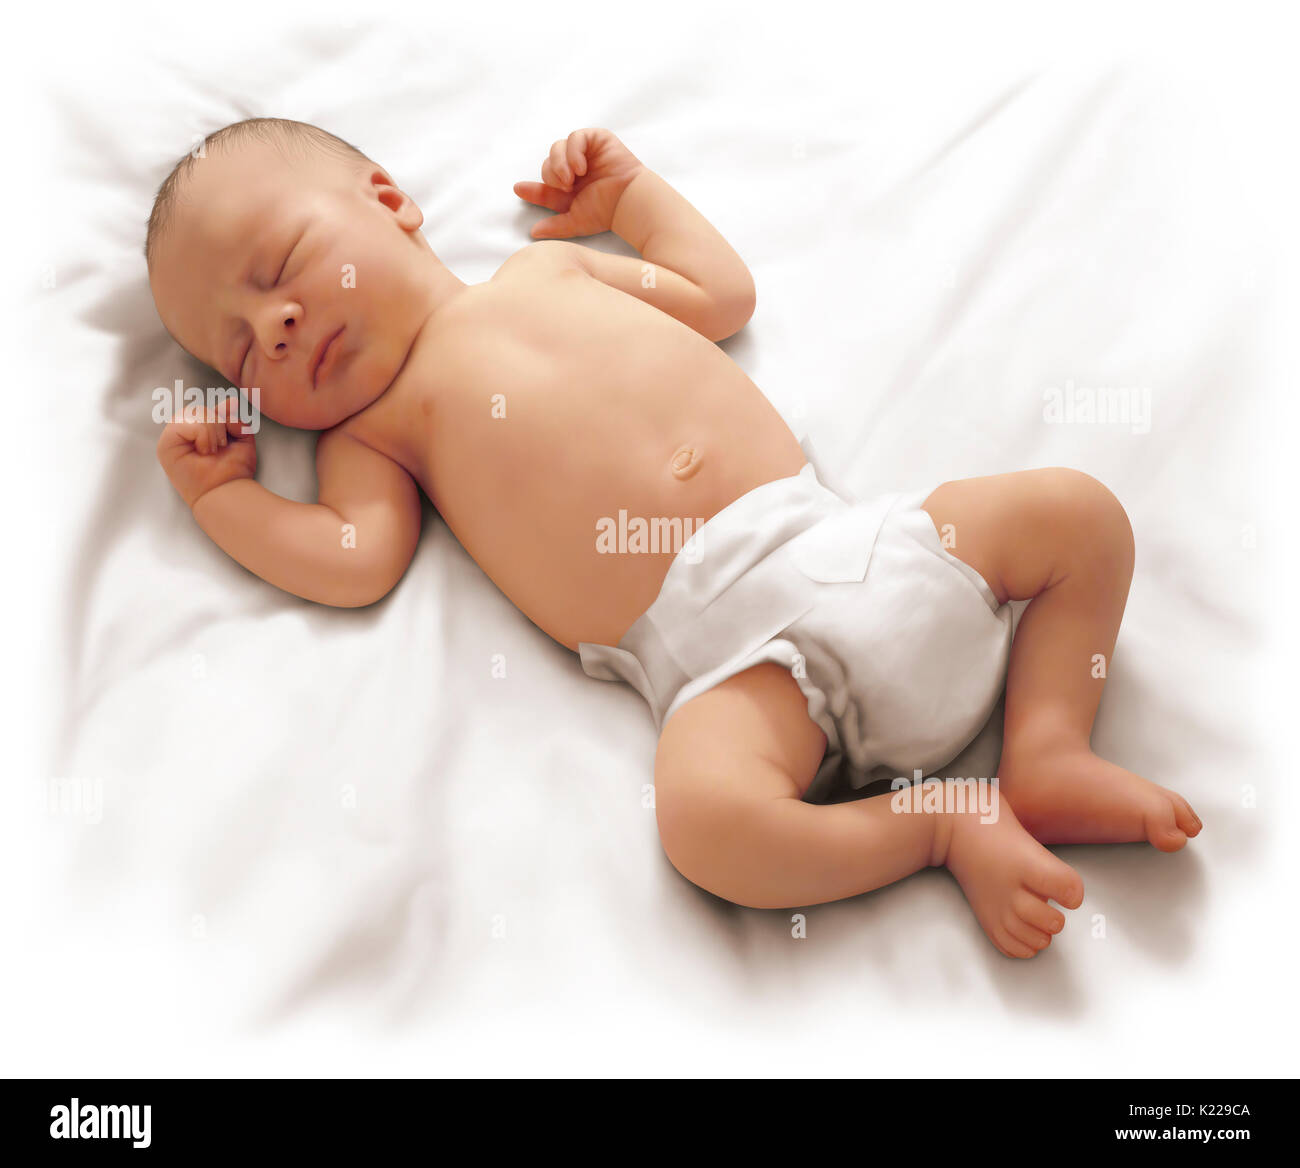 This image shows the morphology of a baby. Stock Photo